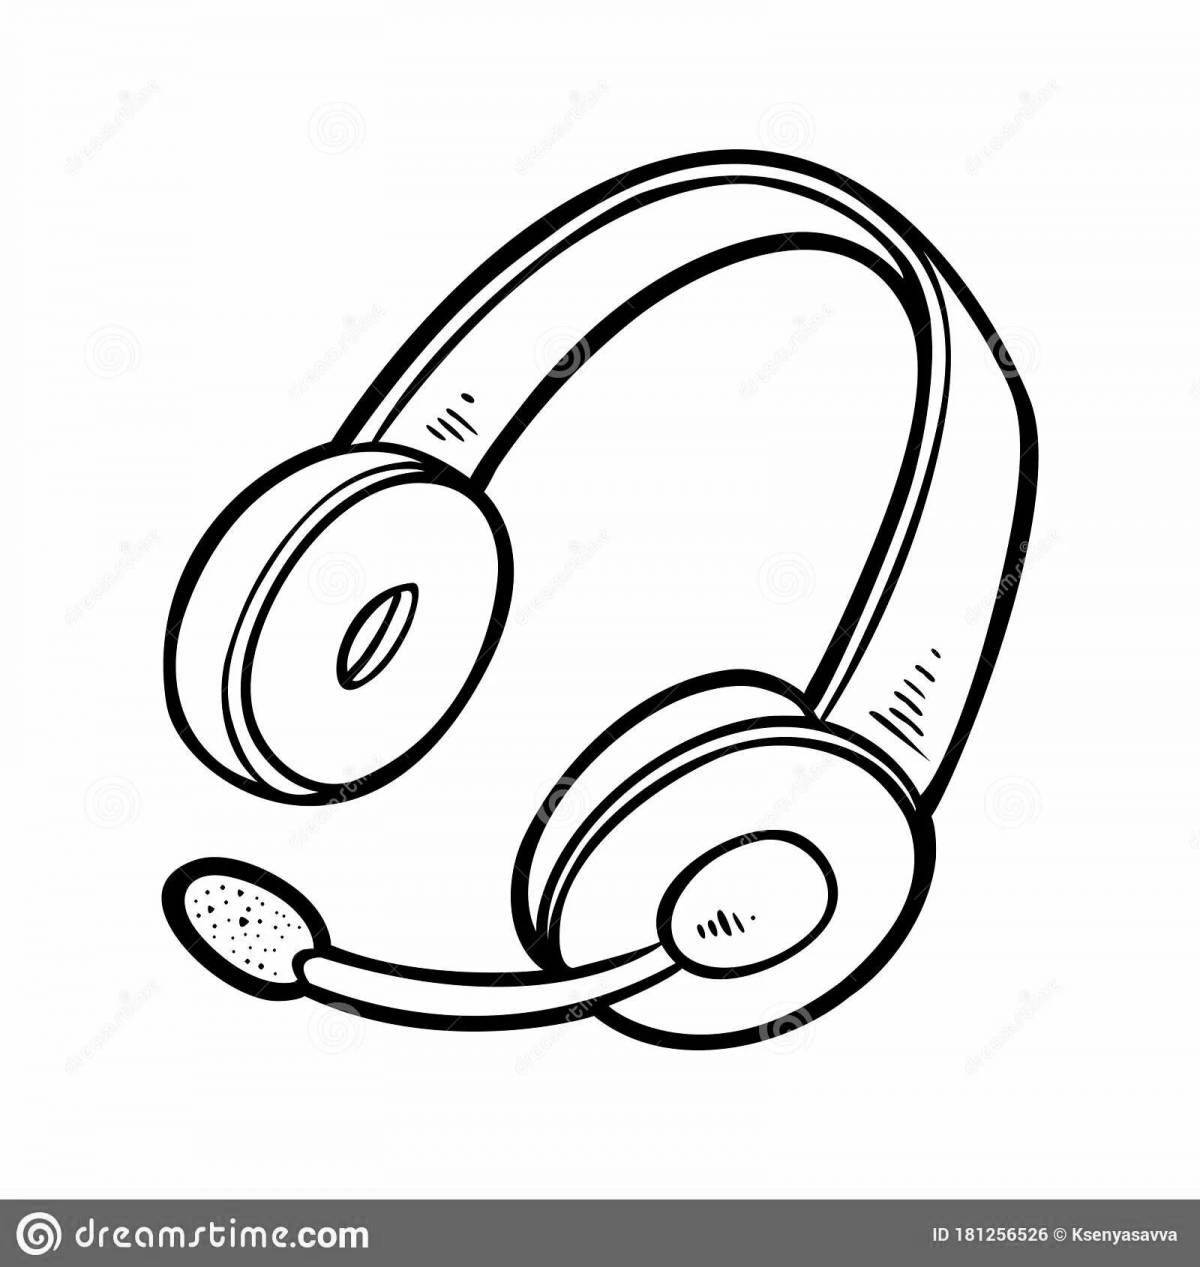 Colorful coloring with headphones for children